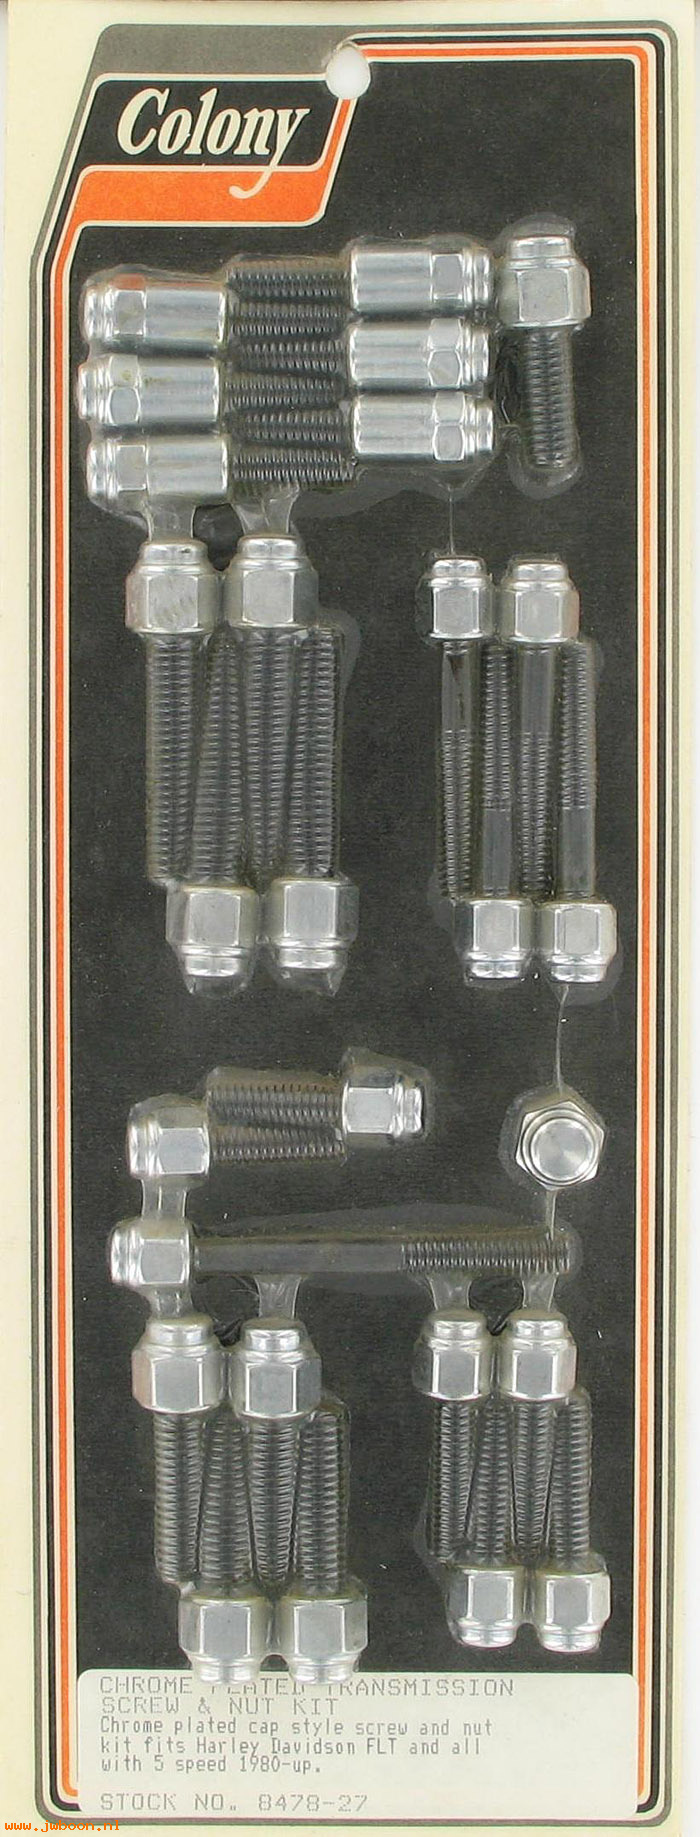 C 8478-27 (): Transmission mounting screws - FLT '80-'85, and 5-speed, in stock